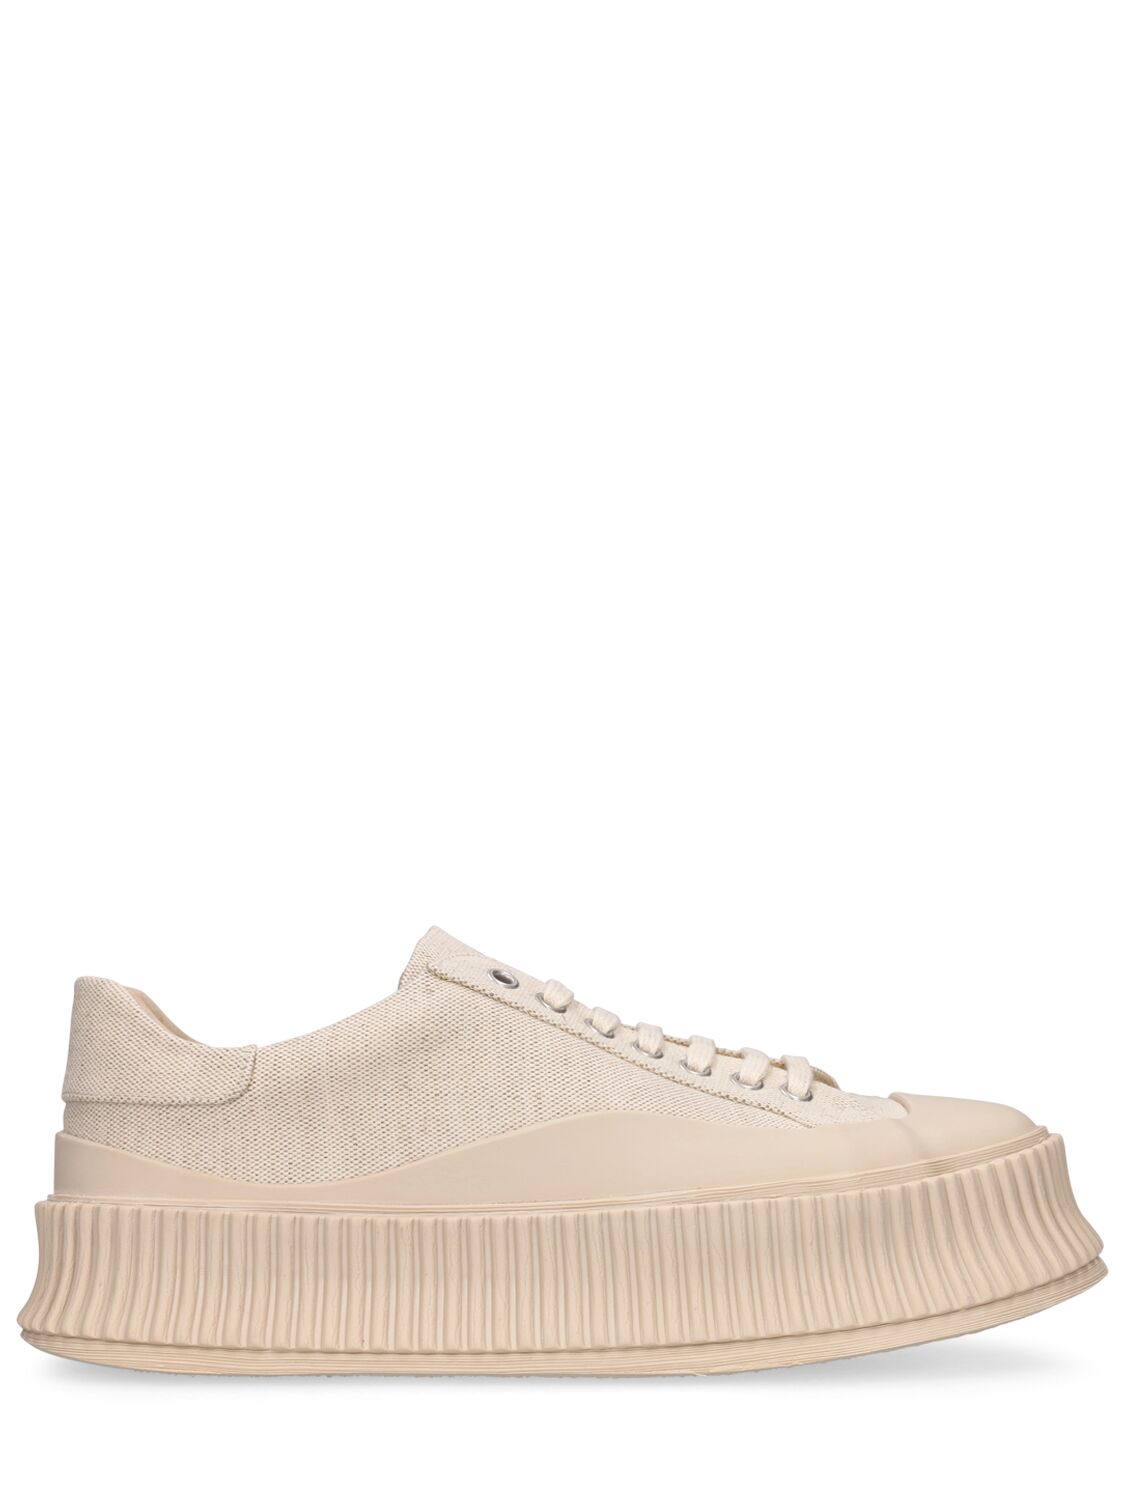 Jil Sander 40mm Vulcanized Canvas Sneakers In Natural